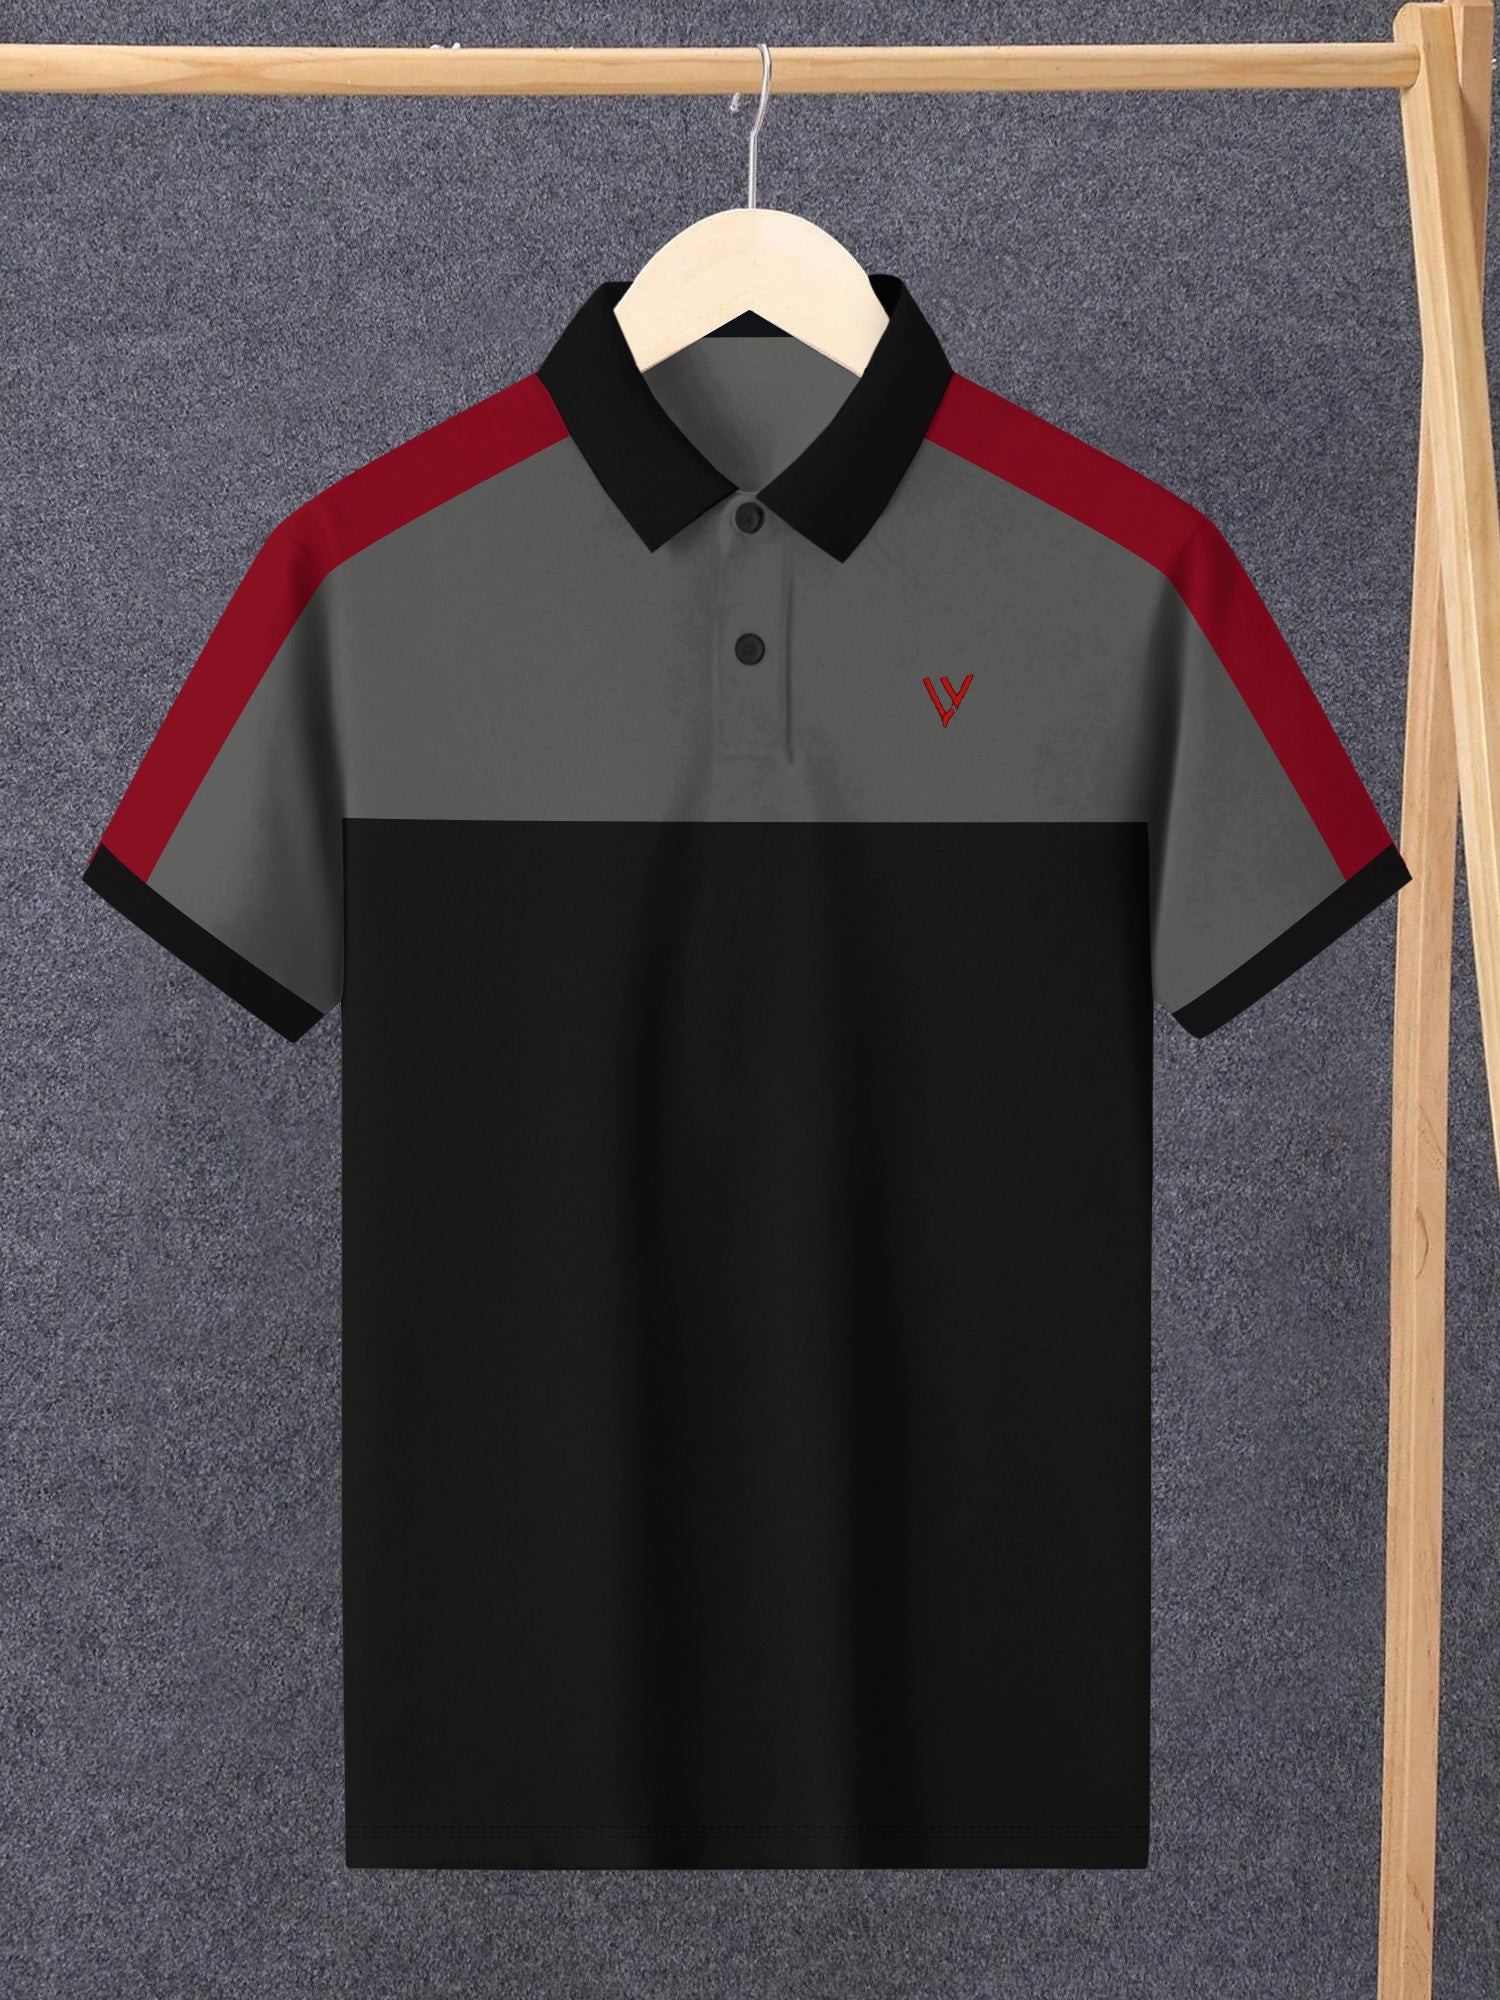 LV Summer Polo Shirt For Men-Dark Grey with Black-BE824